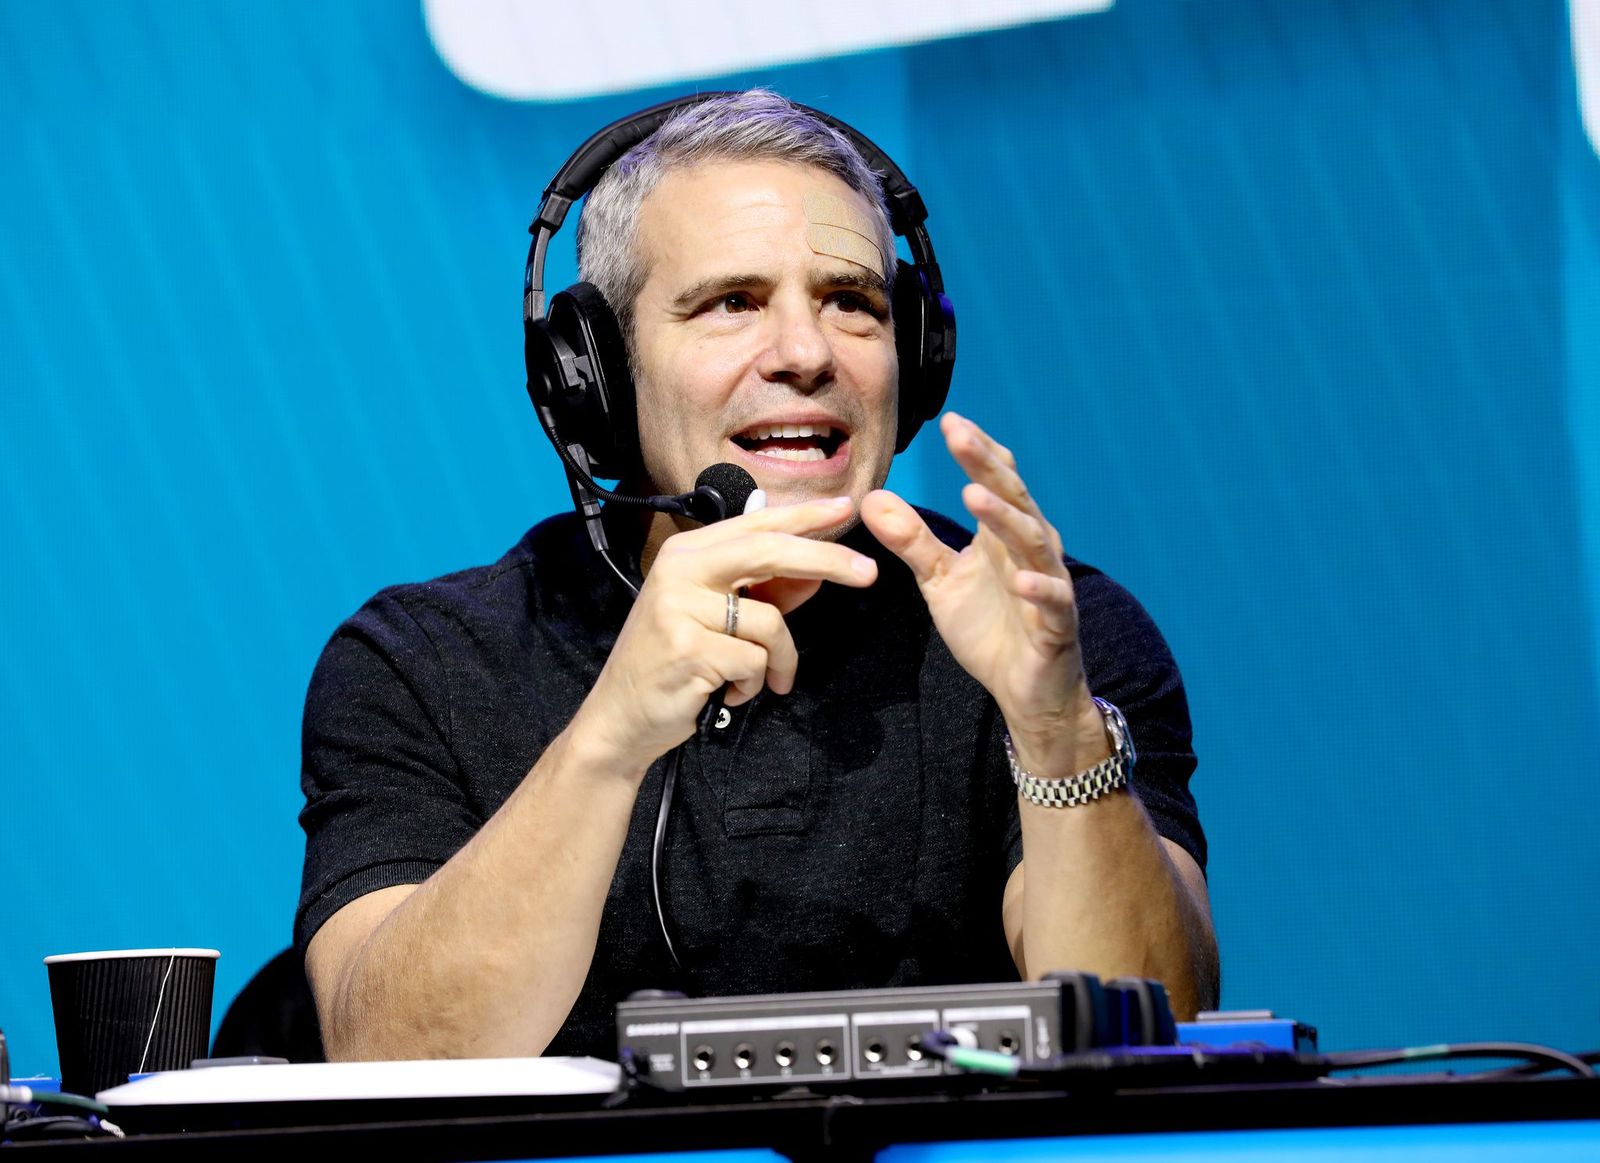 Andy Cohen speaks at the Super Bowl LIV for SiriusXM on January 31, 2020, in Miami, Florida | Photo: Cindy Ord/Getty Images